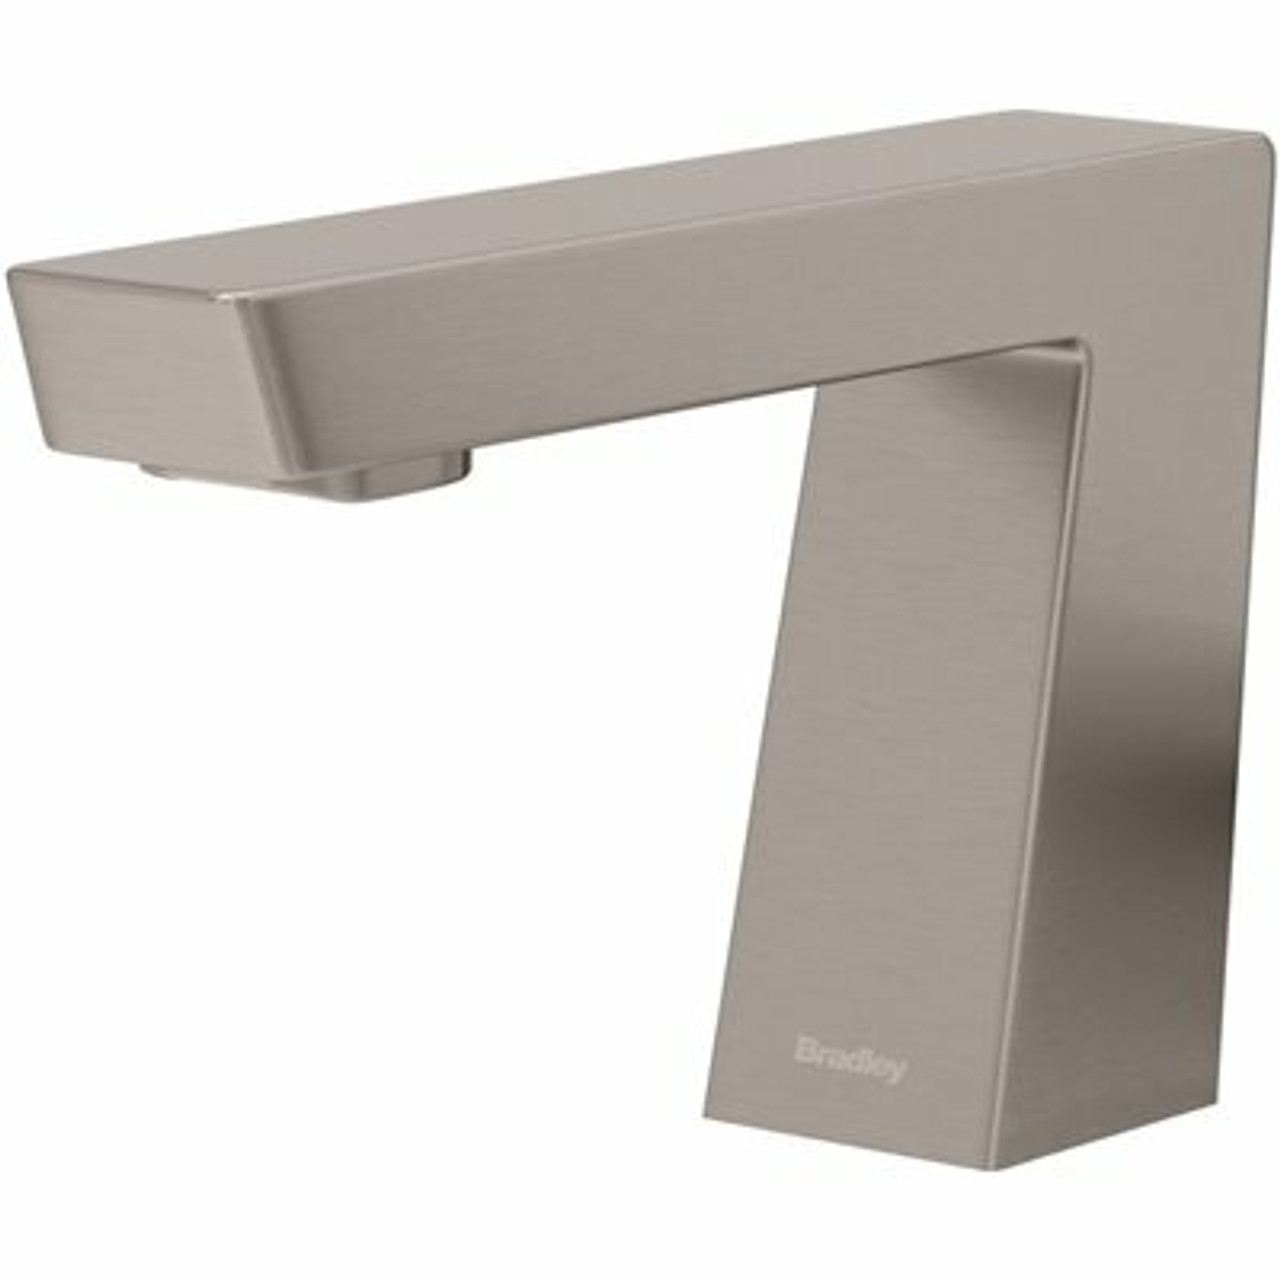 Bradley Zen Verge Faucet In Brushed Stainless - 313831600